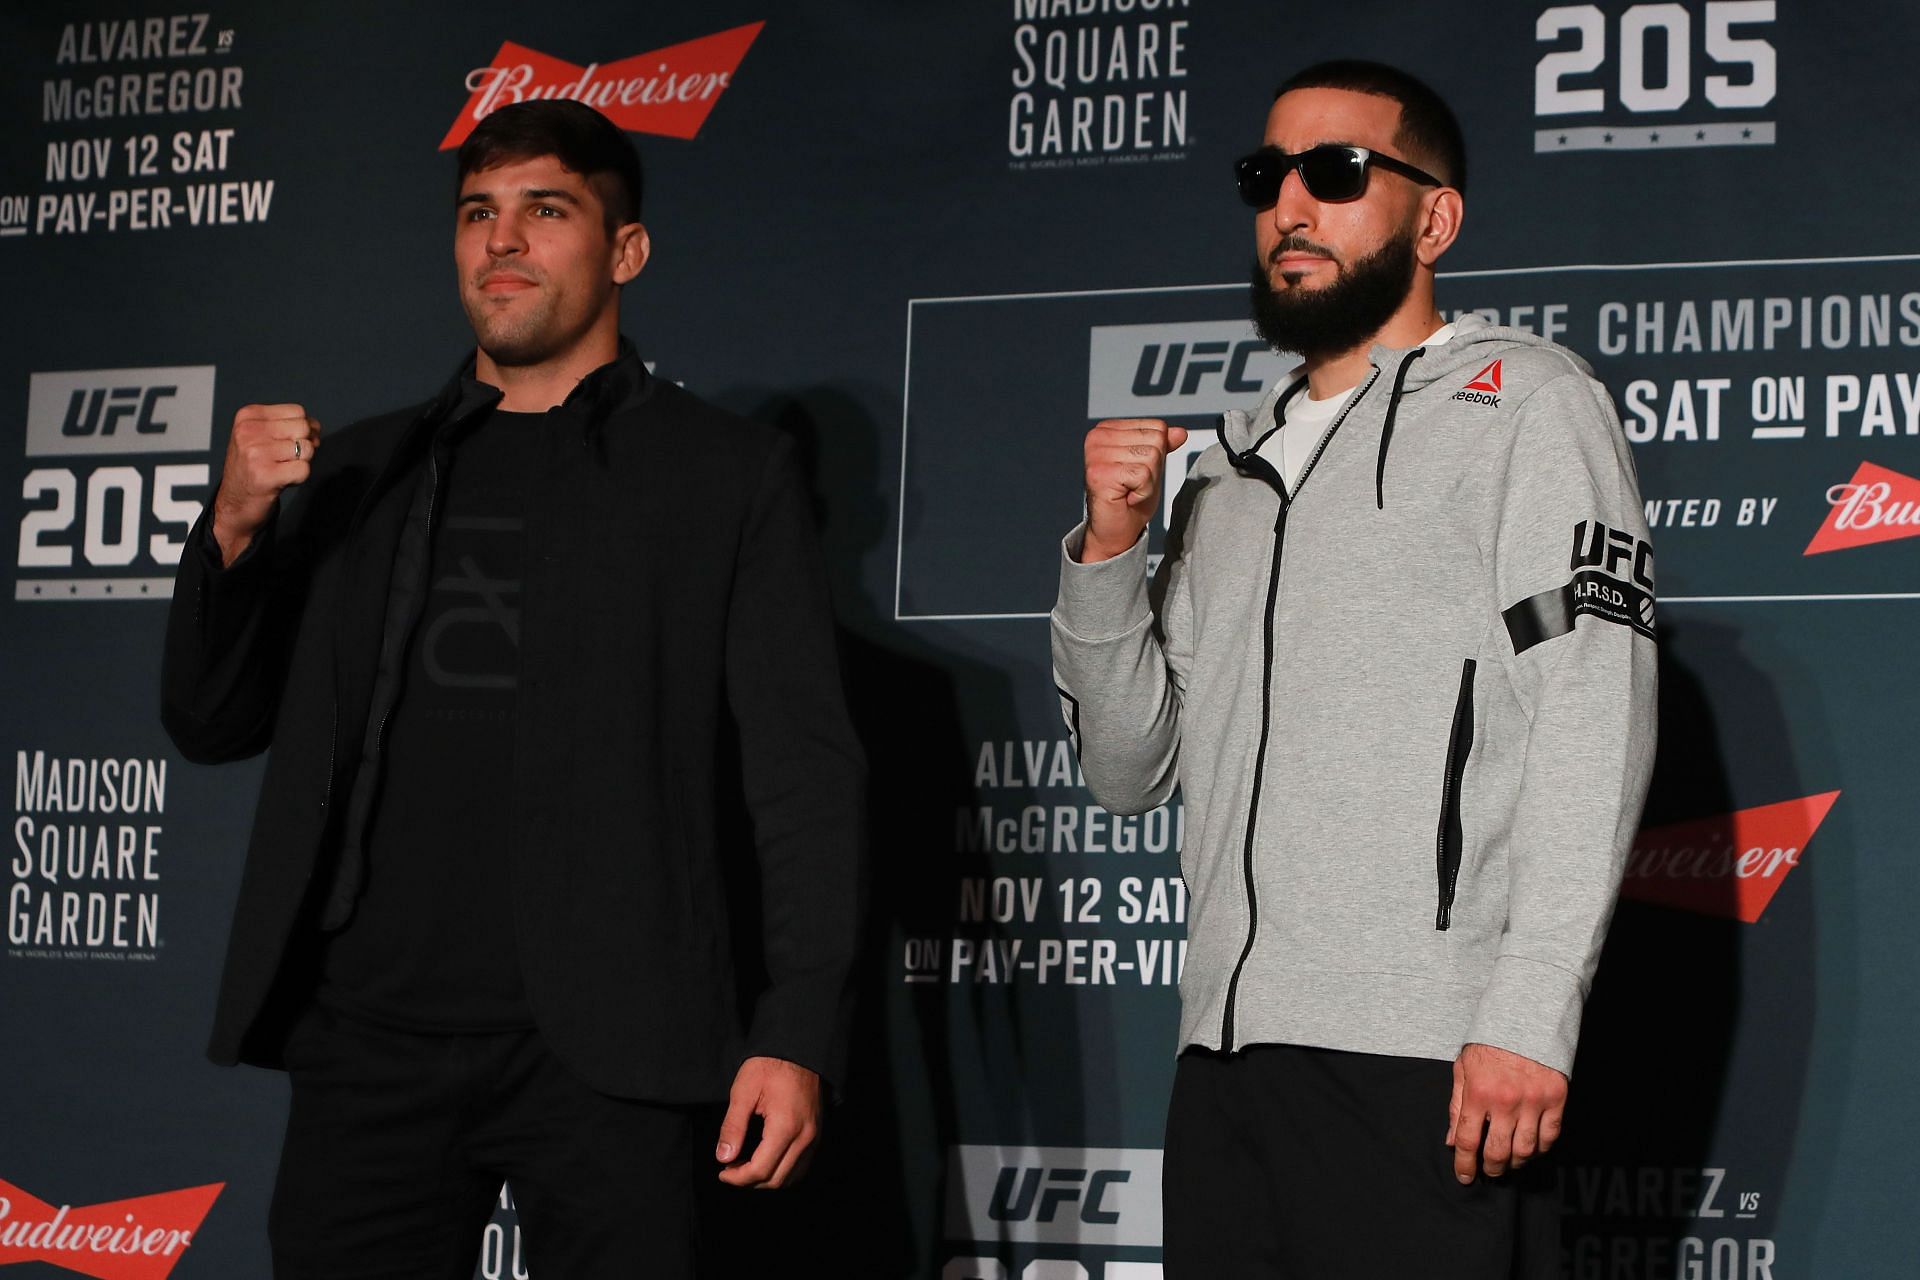 UFC 205 Media Day: Vicente Luque (left) and Belal Muhammad (right) [Image courtesy of Getty]